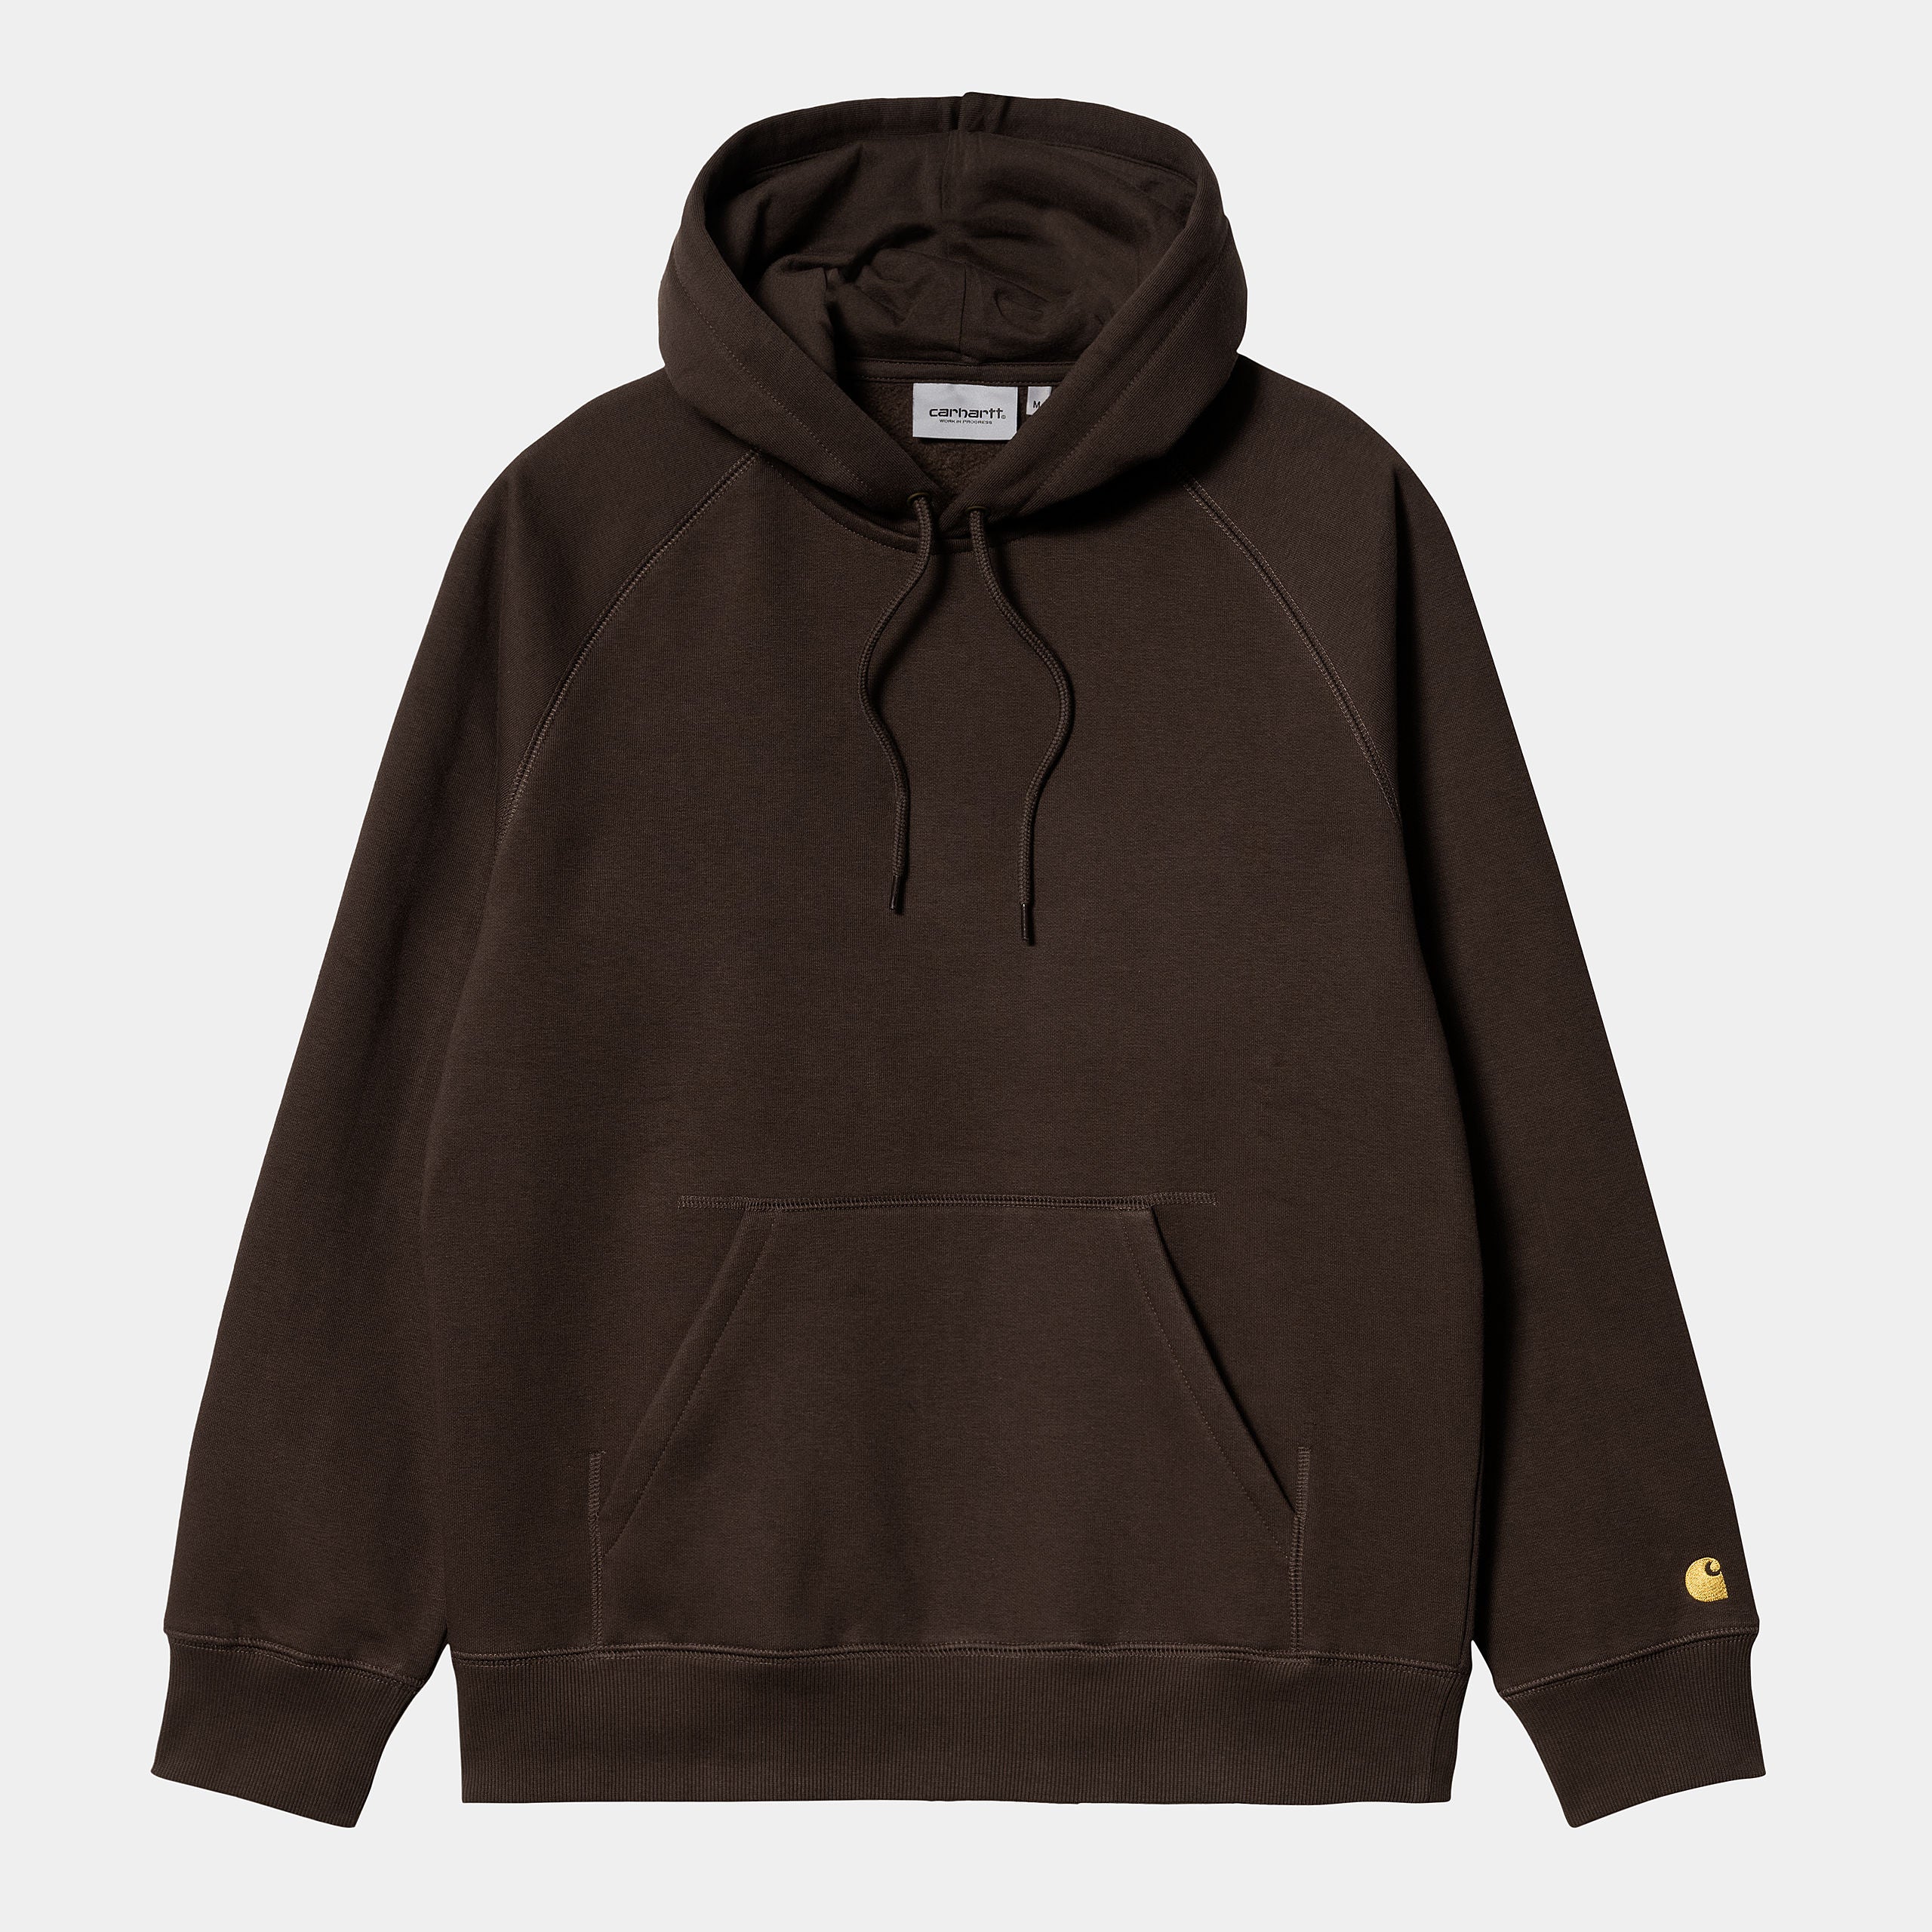 Carhartt WIP Hooded Chase Sweat - Dark Umber / Gold product